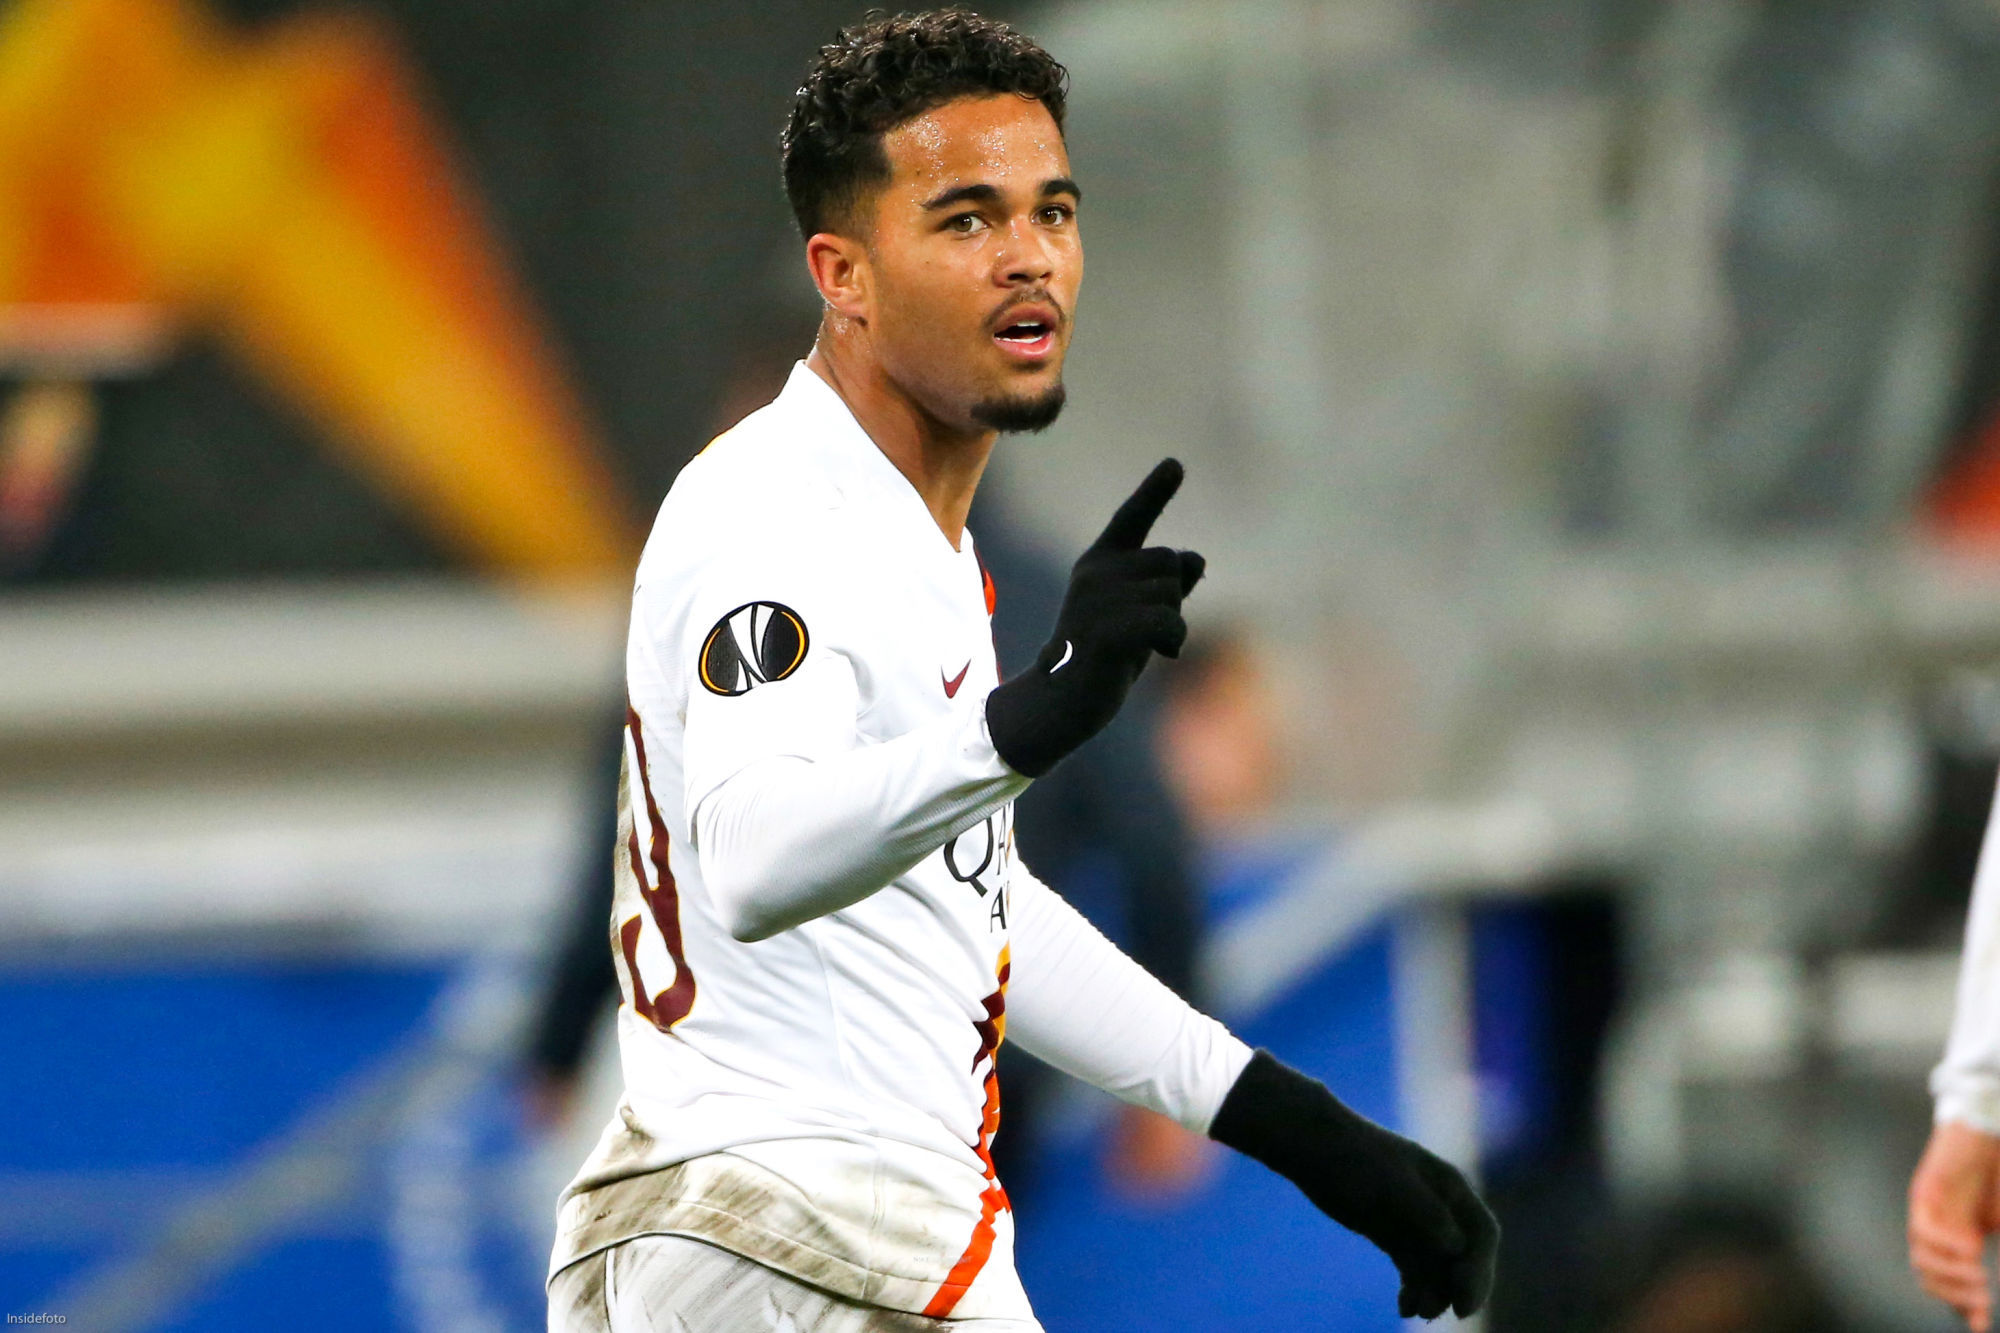 Photo by Icon Sport - Justin KLUIVERT - Ghelamco Arena - Gent (Belgique)